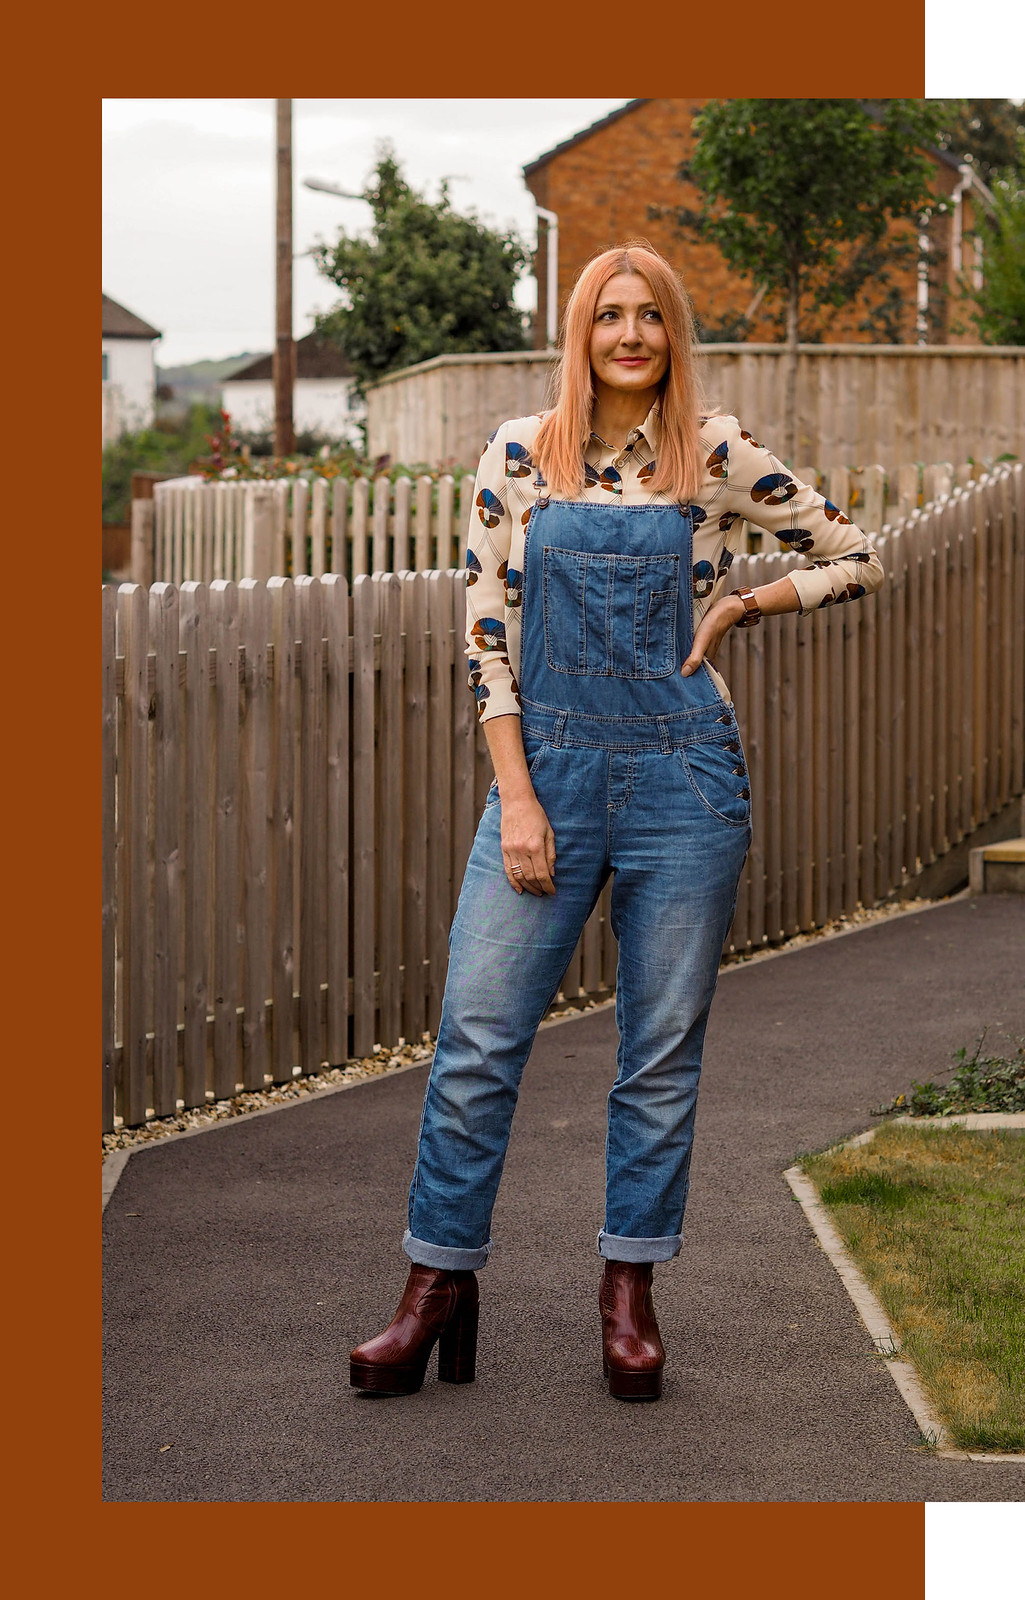 Ways to Style Dungarees: With 70s Style Shirt, Boots and Hair | Not Dressed As Lamb, Style Over 40